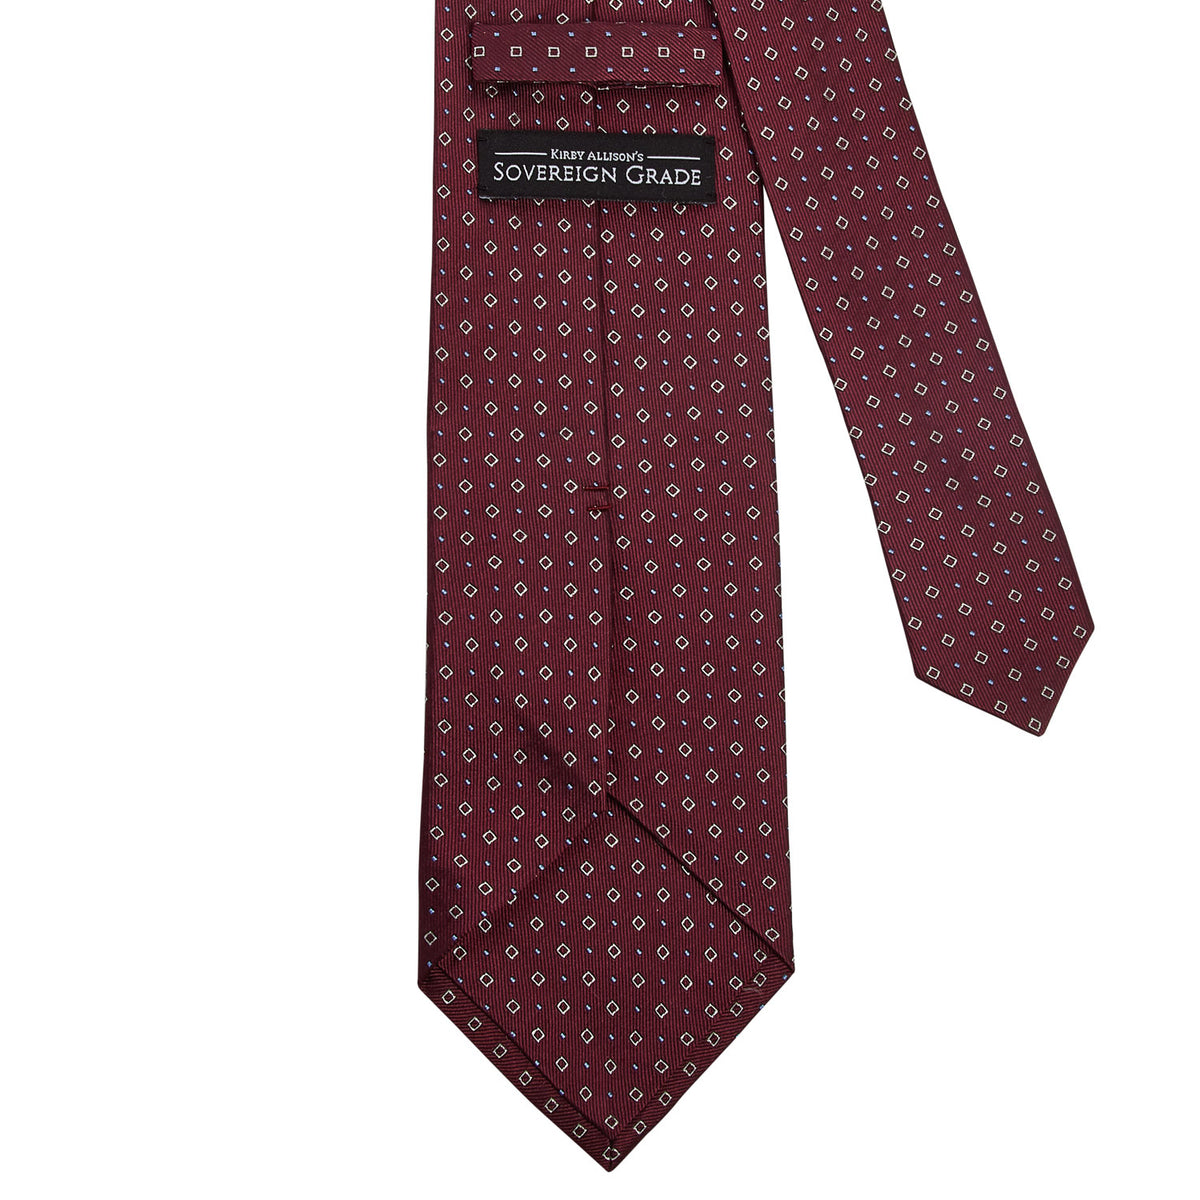 A handmade Sovereign Grade Oxblood Alternating Square Dot Jacquard Tie from KirbyAllison.com, of the highest quality.